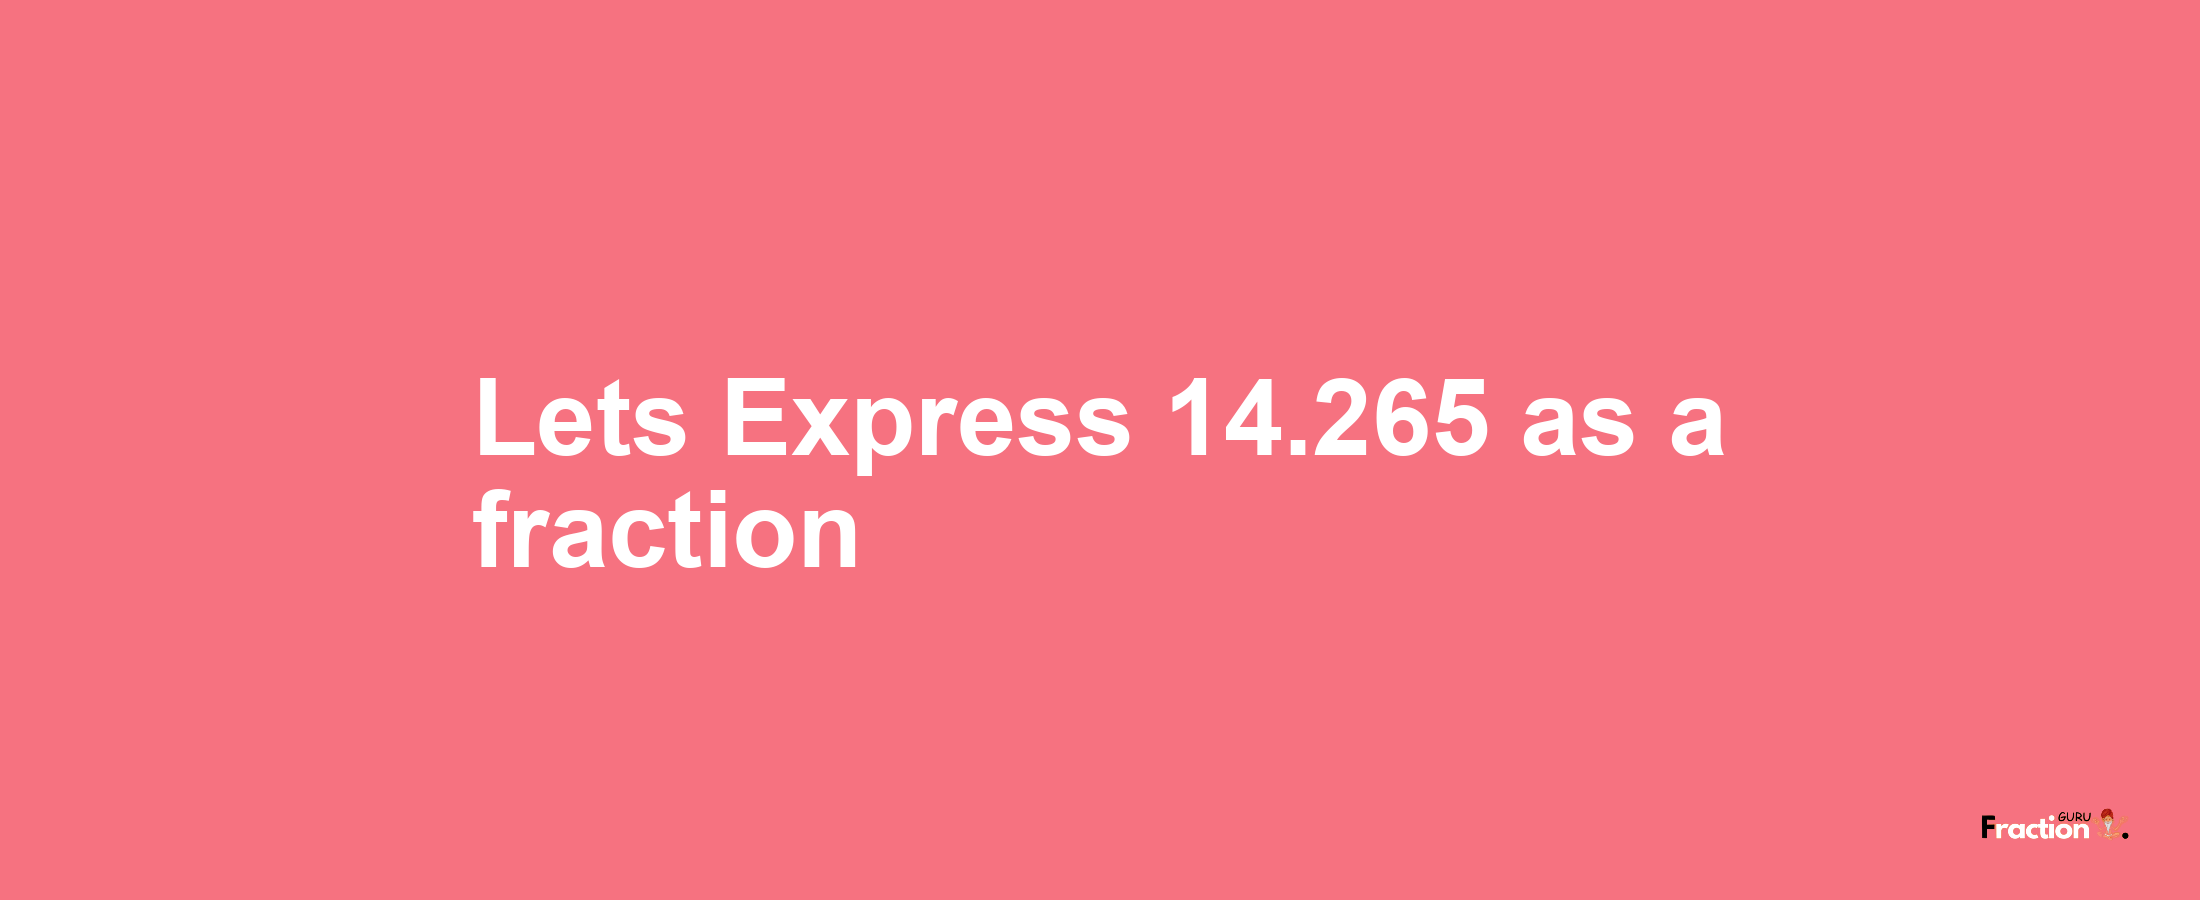 Lets Express 14.265 as afraction